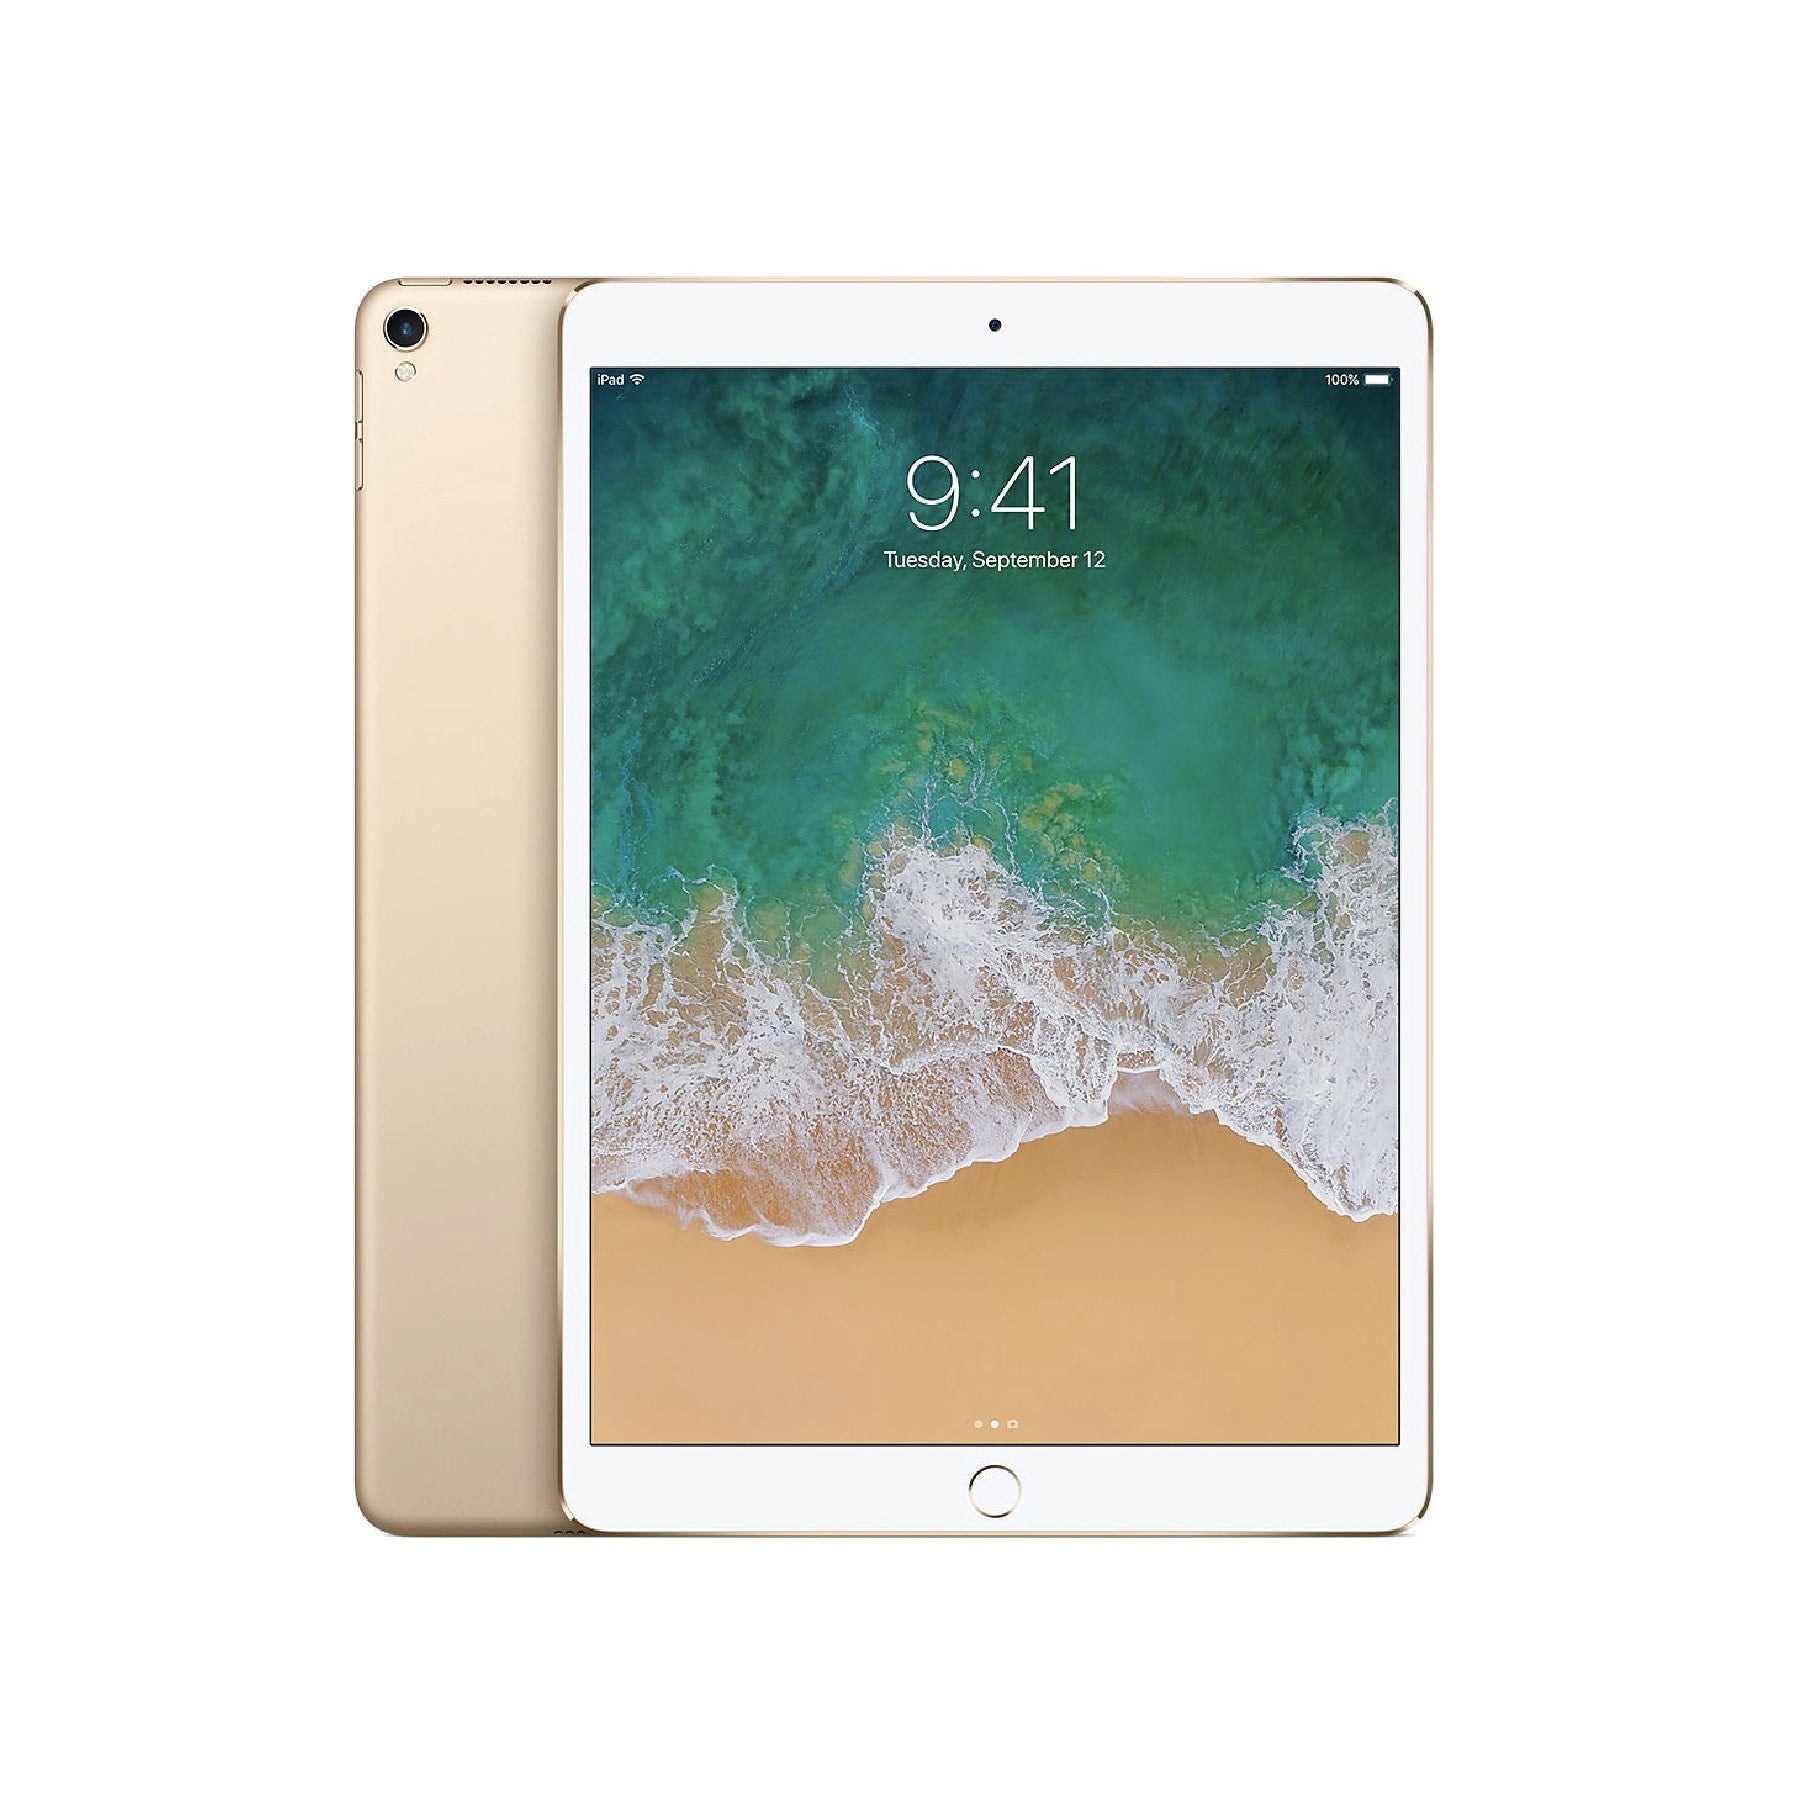 iPad Pro (10.5-inch, 2017) Wi-Fi + Cellular - iStore Pre-owned